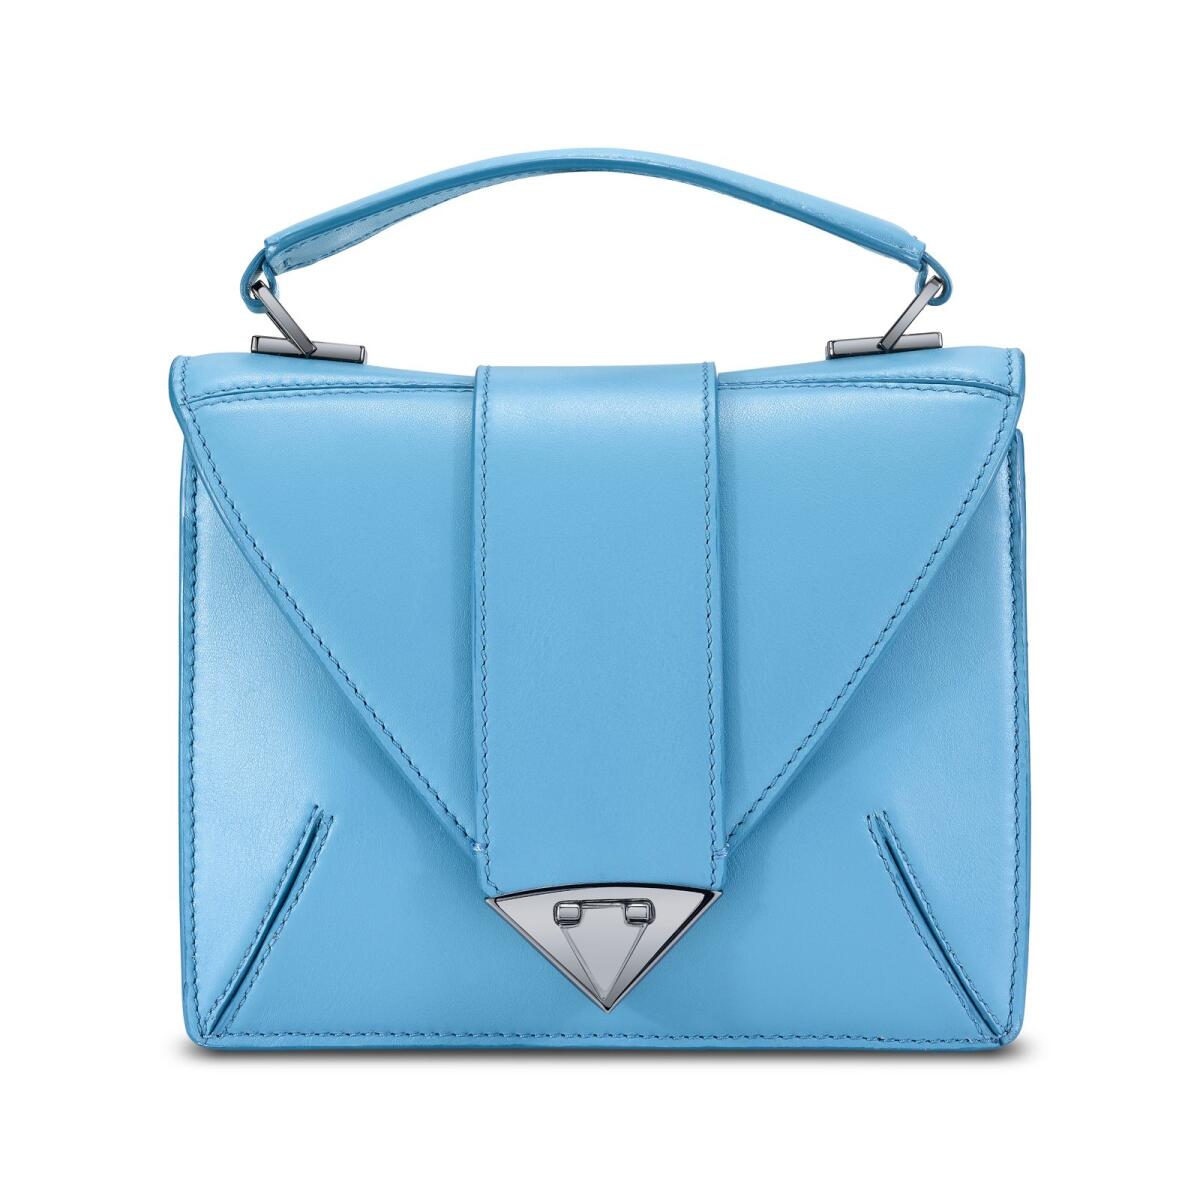 This exquisitely crafted Rita Small Handbag Santorini Leather captures the spirit of celebration with a seamless blend of tranquil blue tones. Dh9,181